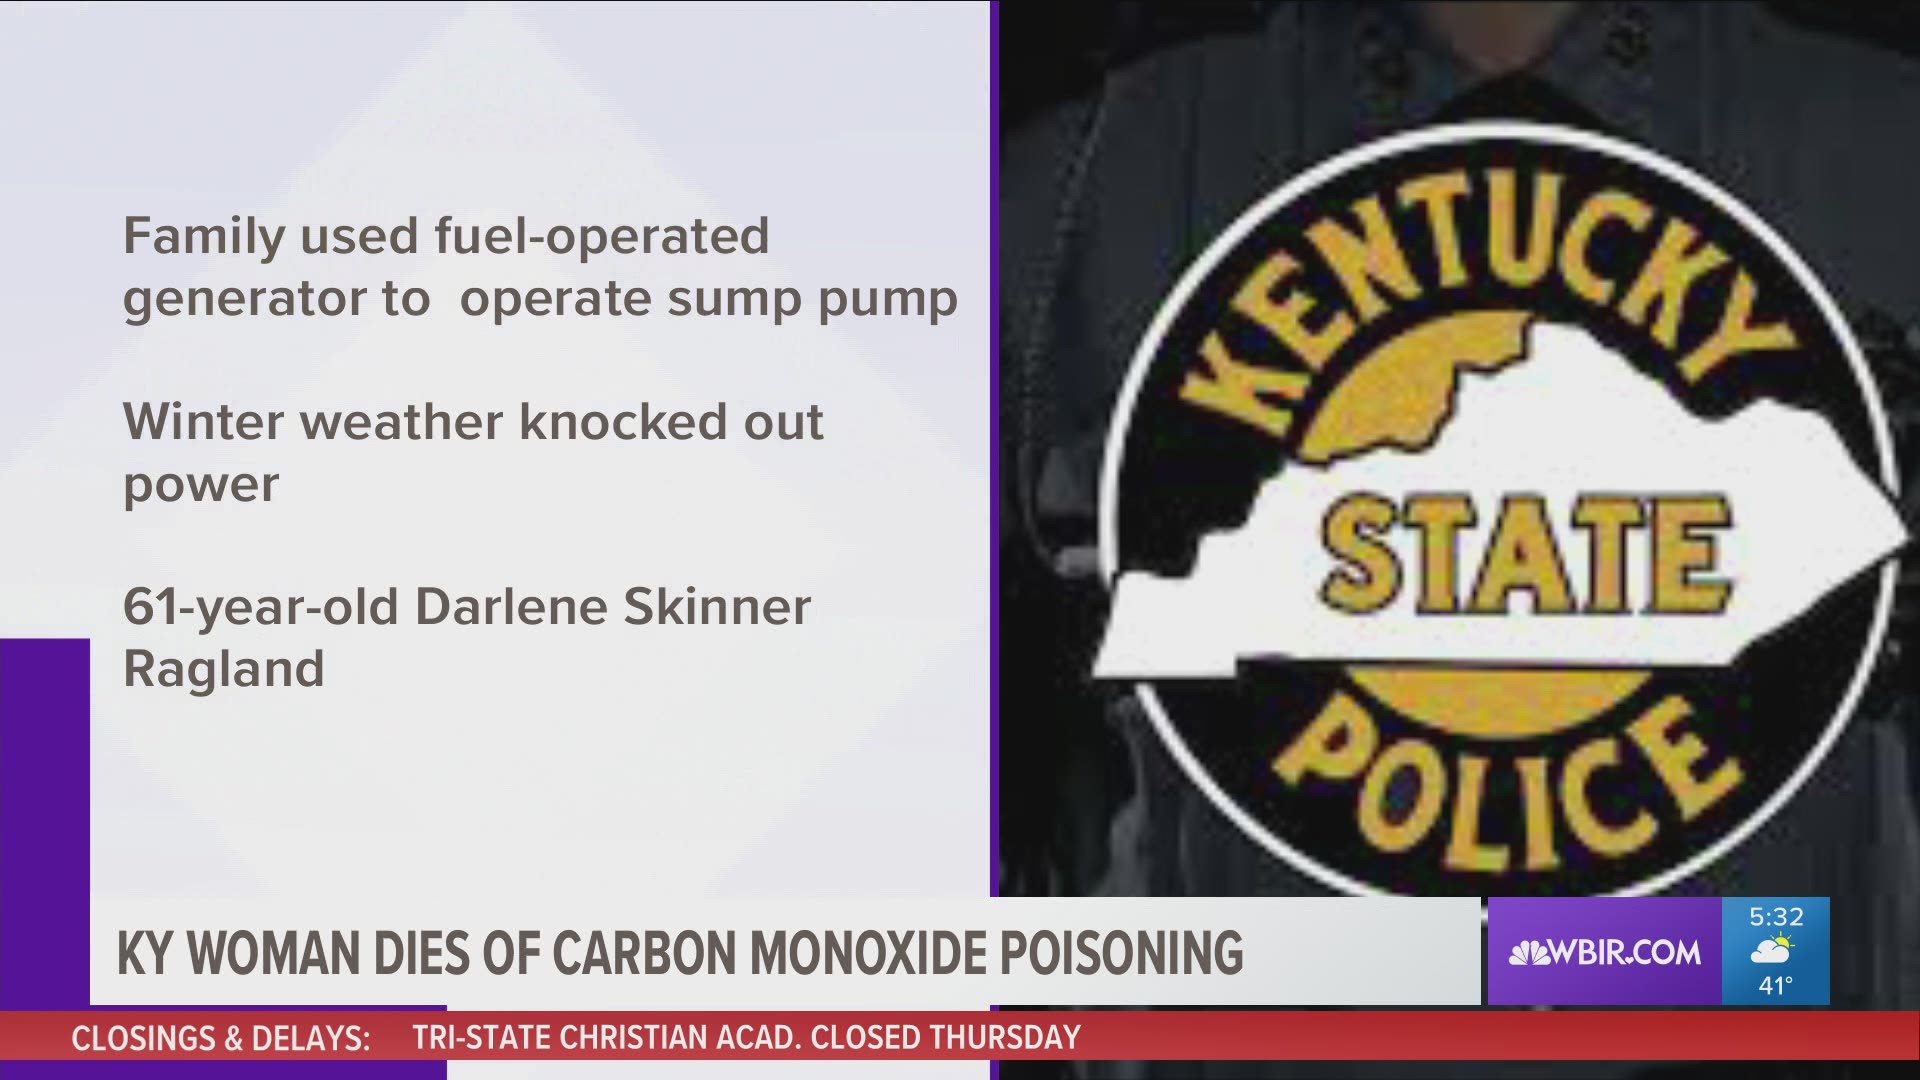 A Kentucky woman died of carbon monoxide poisoning after she and her husband used a generator when they lost power.